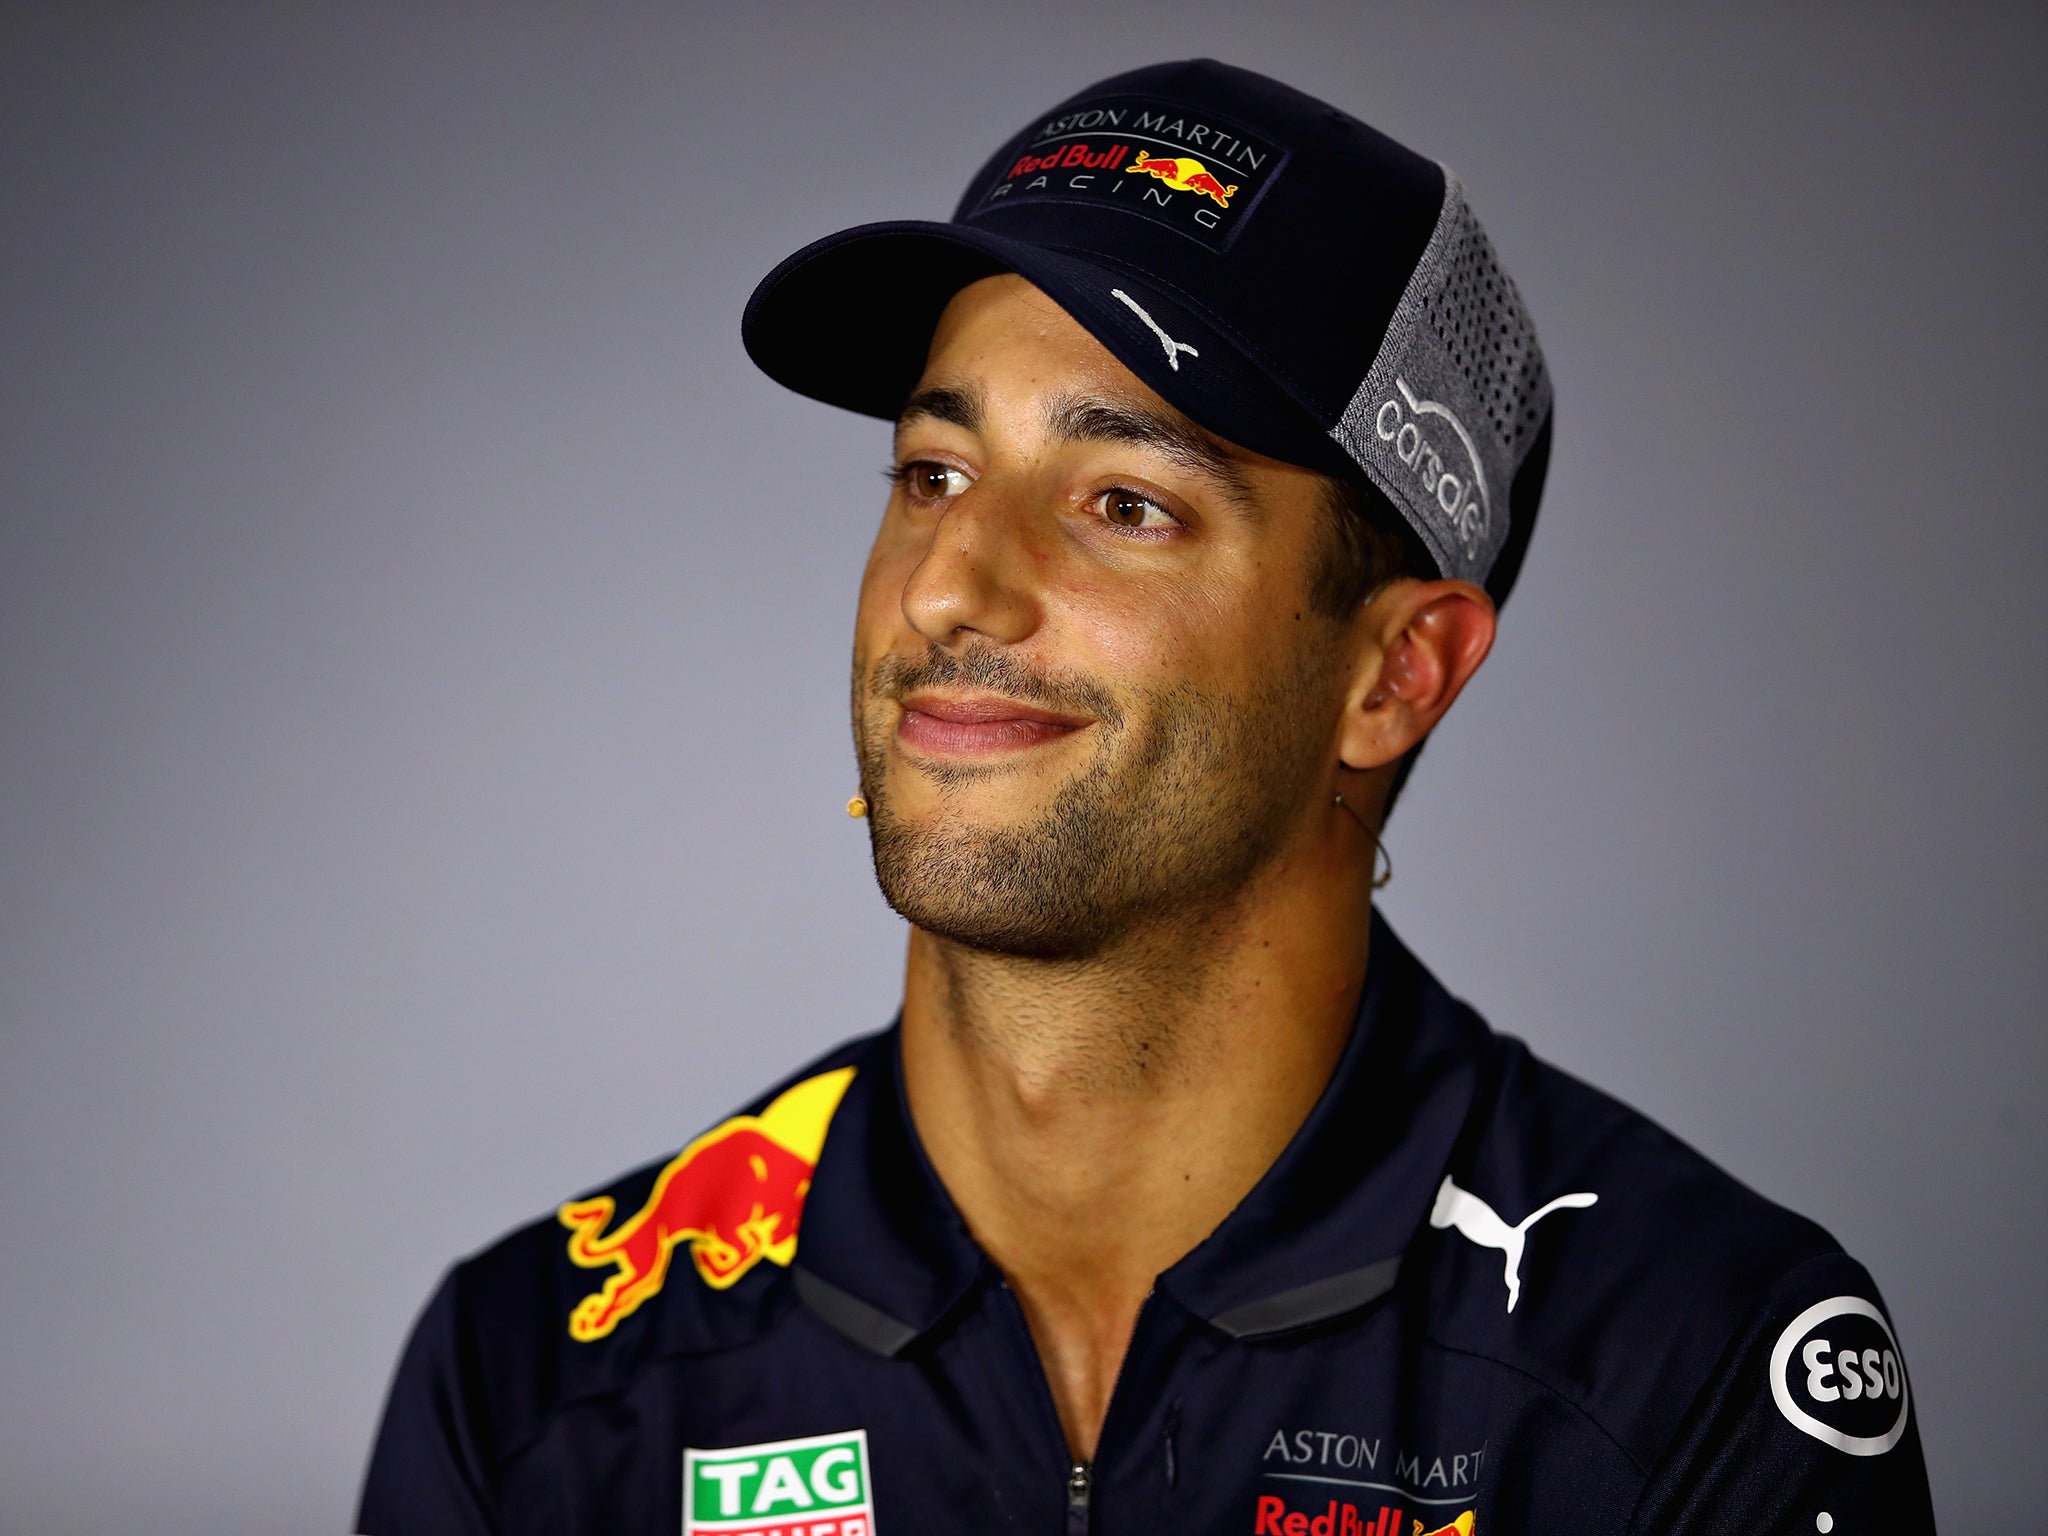 Daniel Ricciardo has been linked with both Mercedes and Ferrari should he leave Red Bull